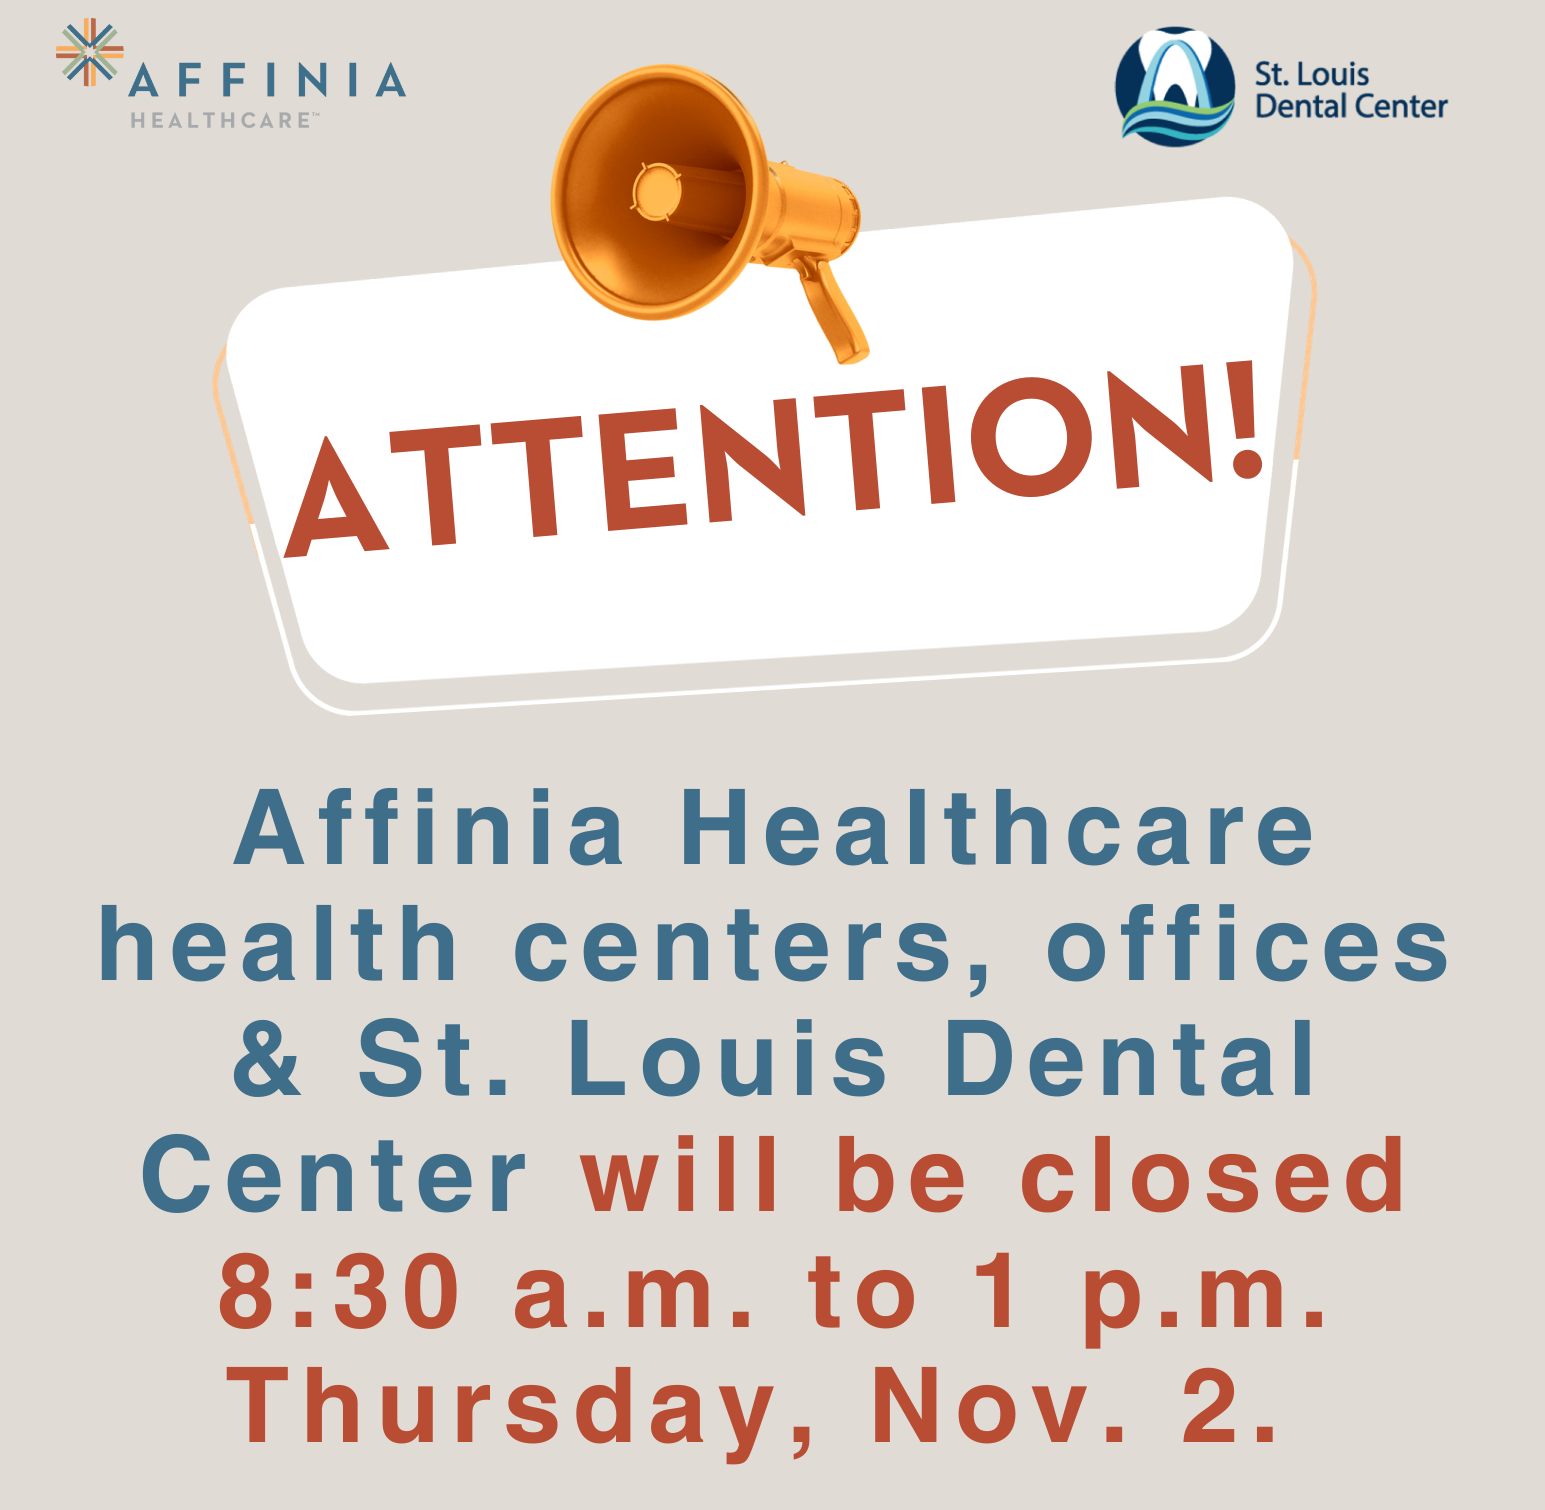 affinia will be closed morning of Nov 2 for ribbon cutting